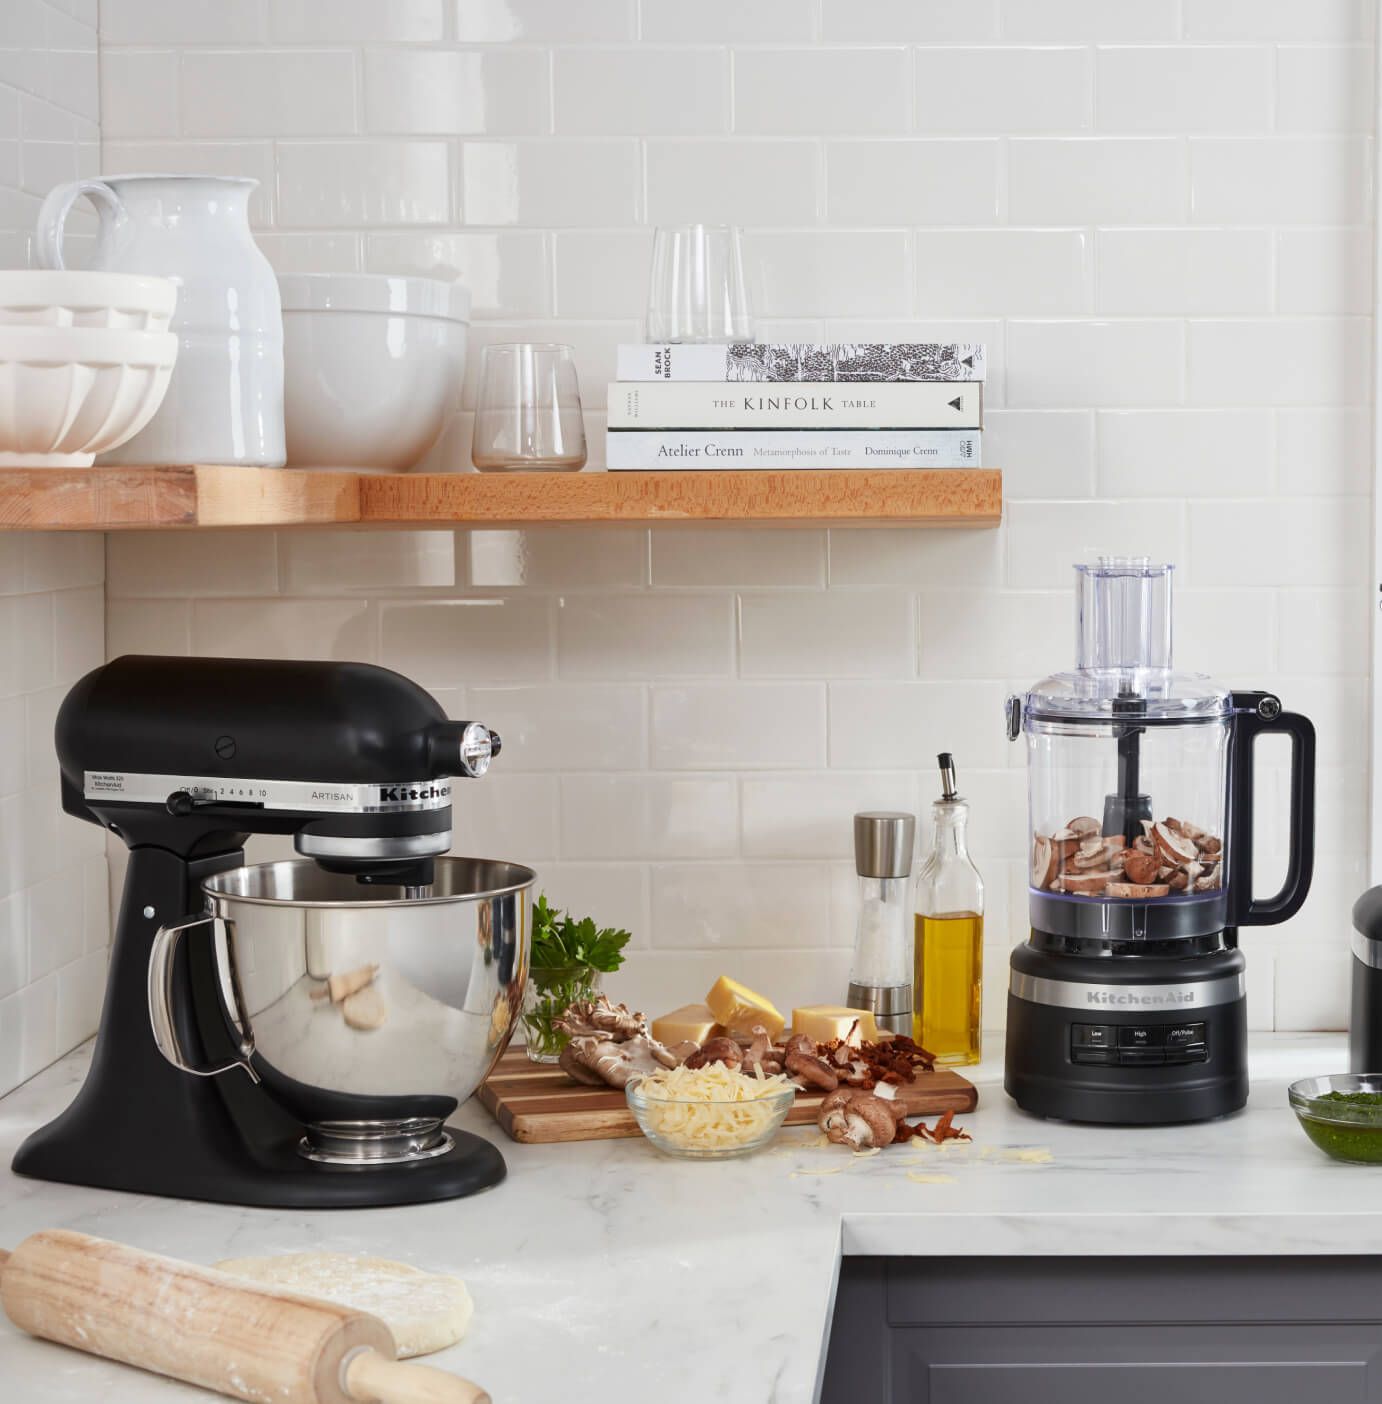 A KitchenAid® Stand Mixer and Food Processor in a crisp, stylish kitchen preparing fresh ingredients.